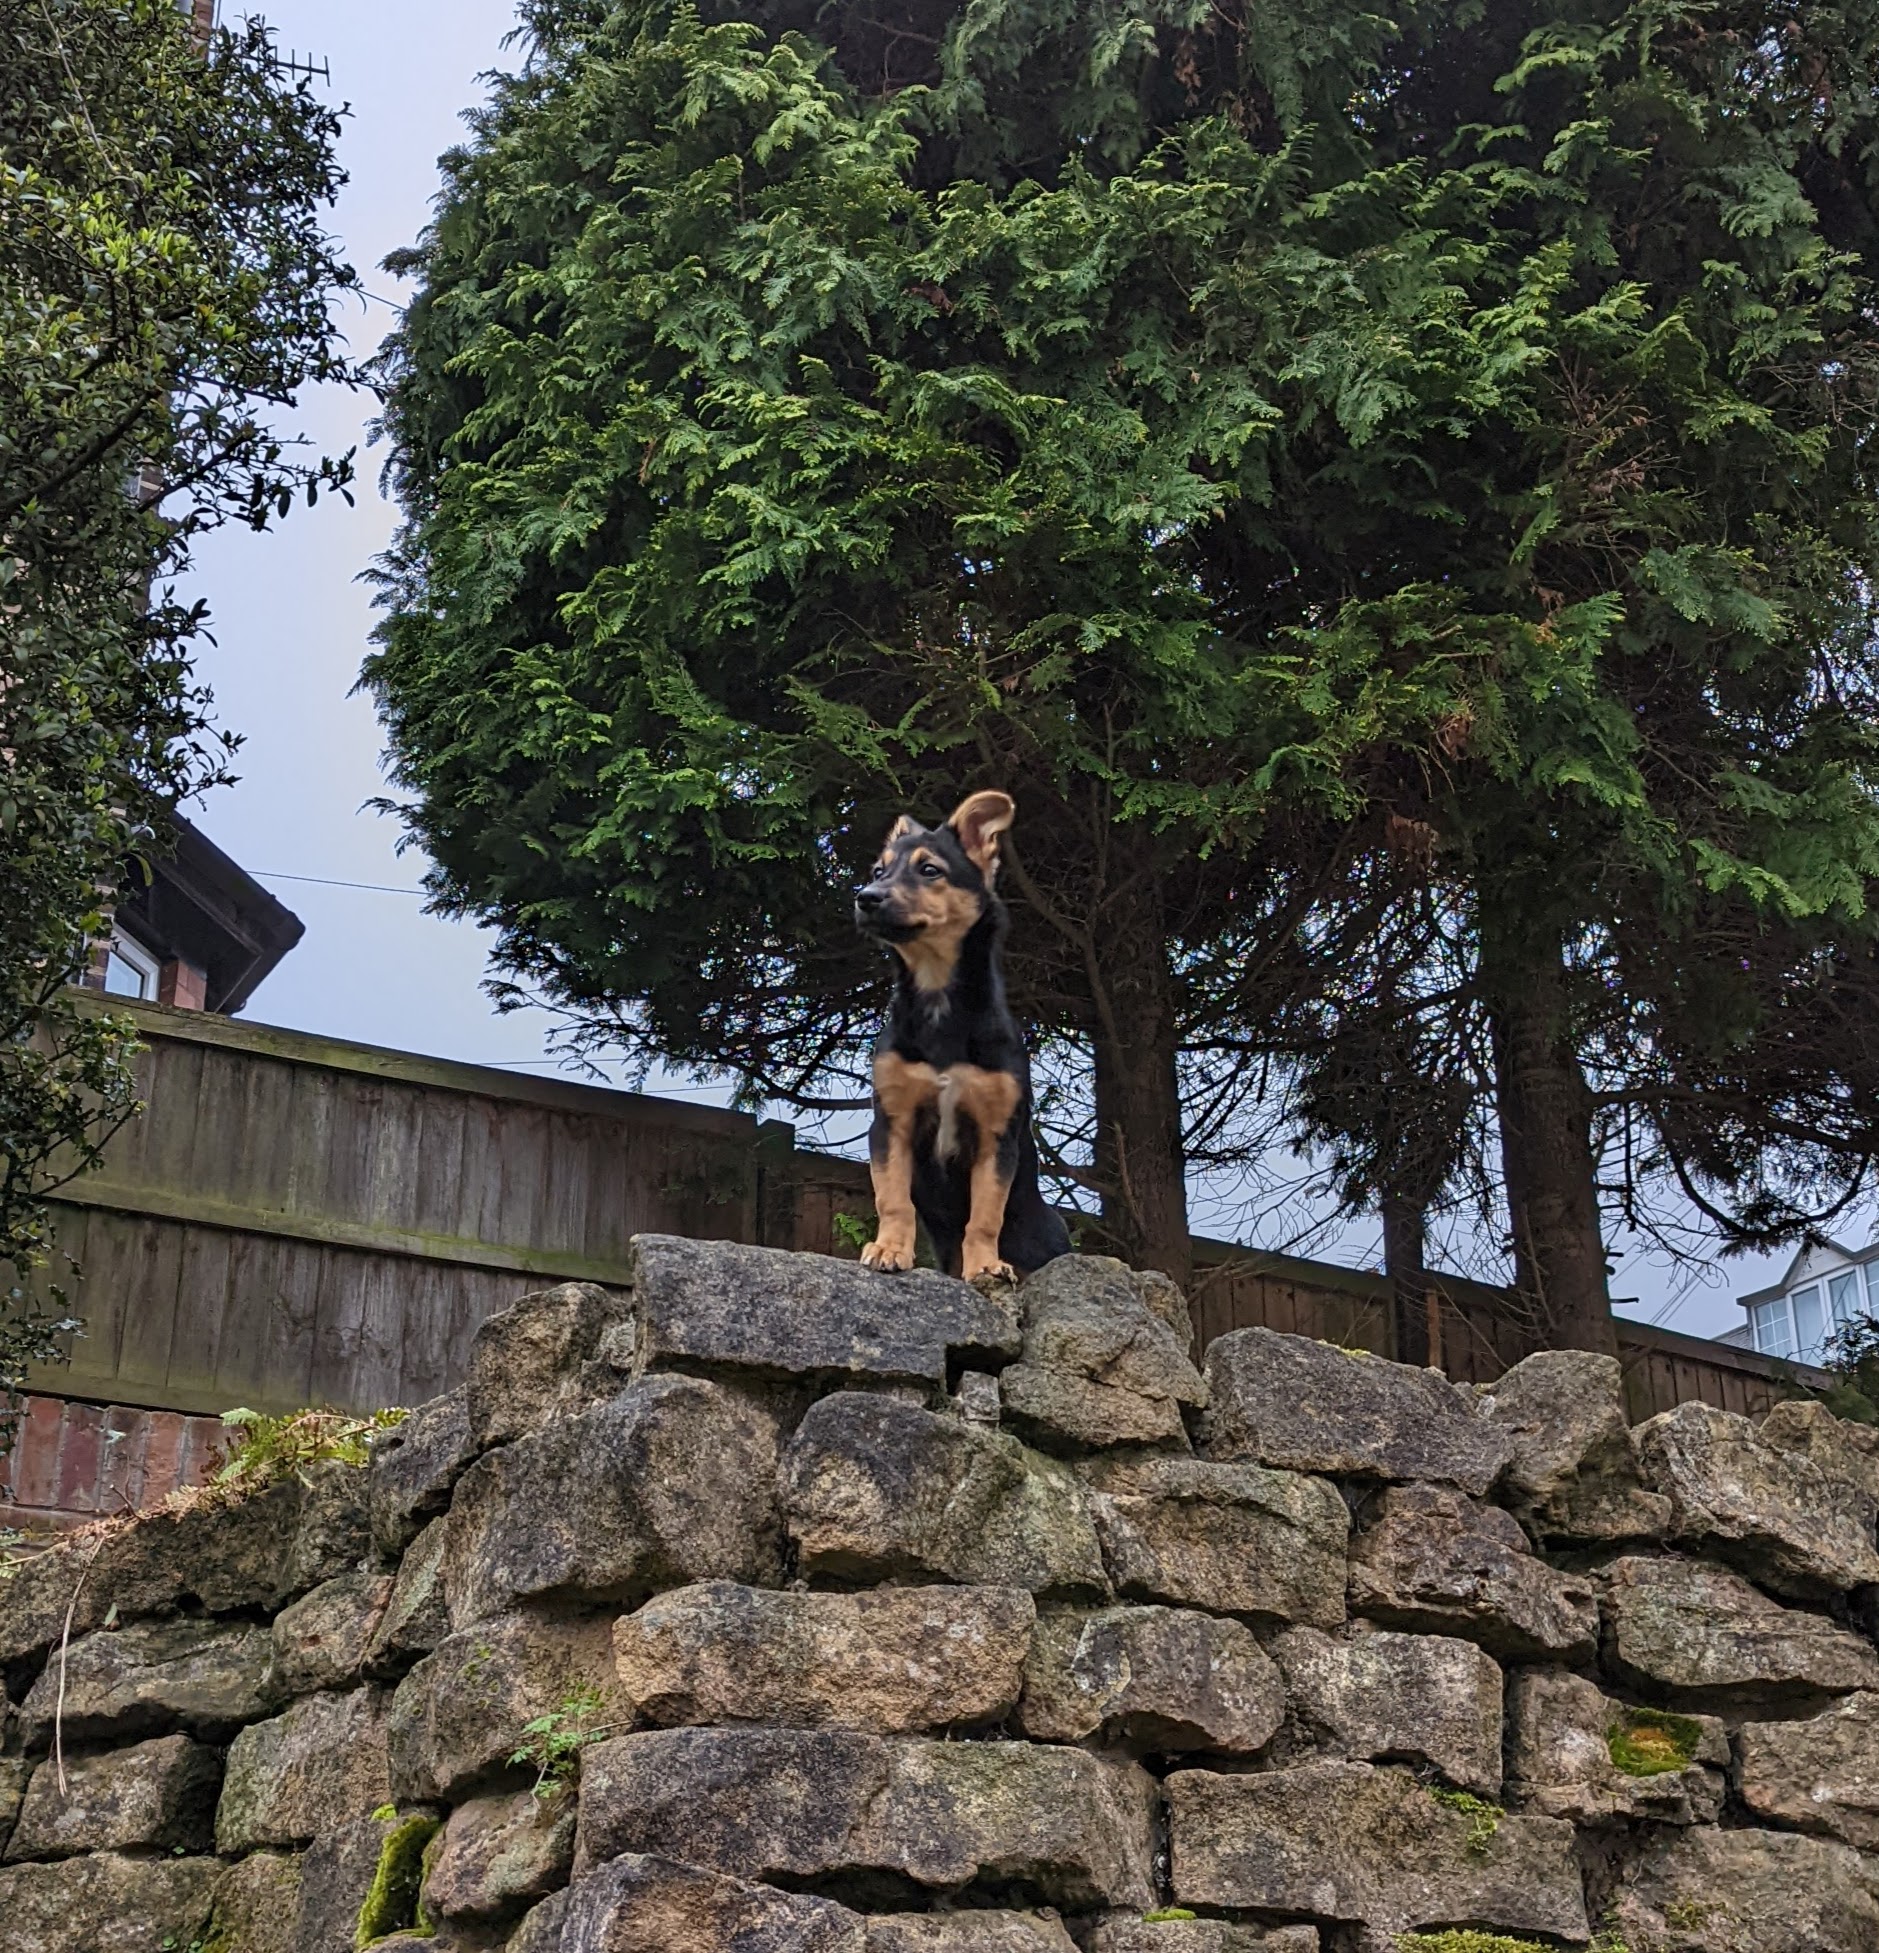 Cookie the dog standing on an upper level in the garden, on top of a grey stone wall, looking out over the garden